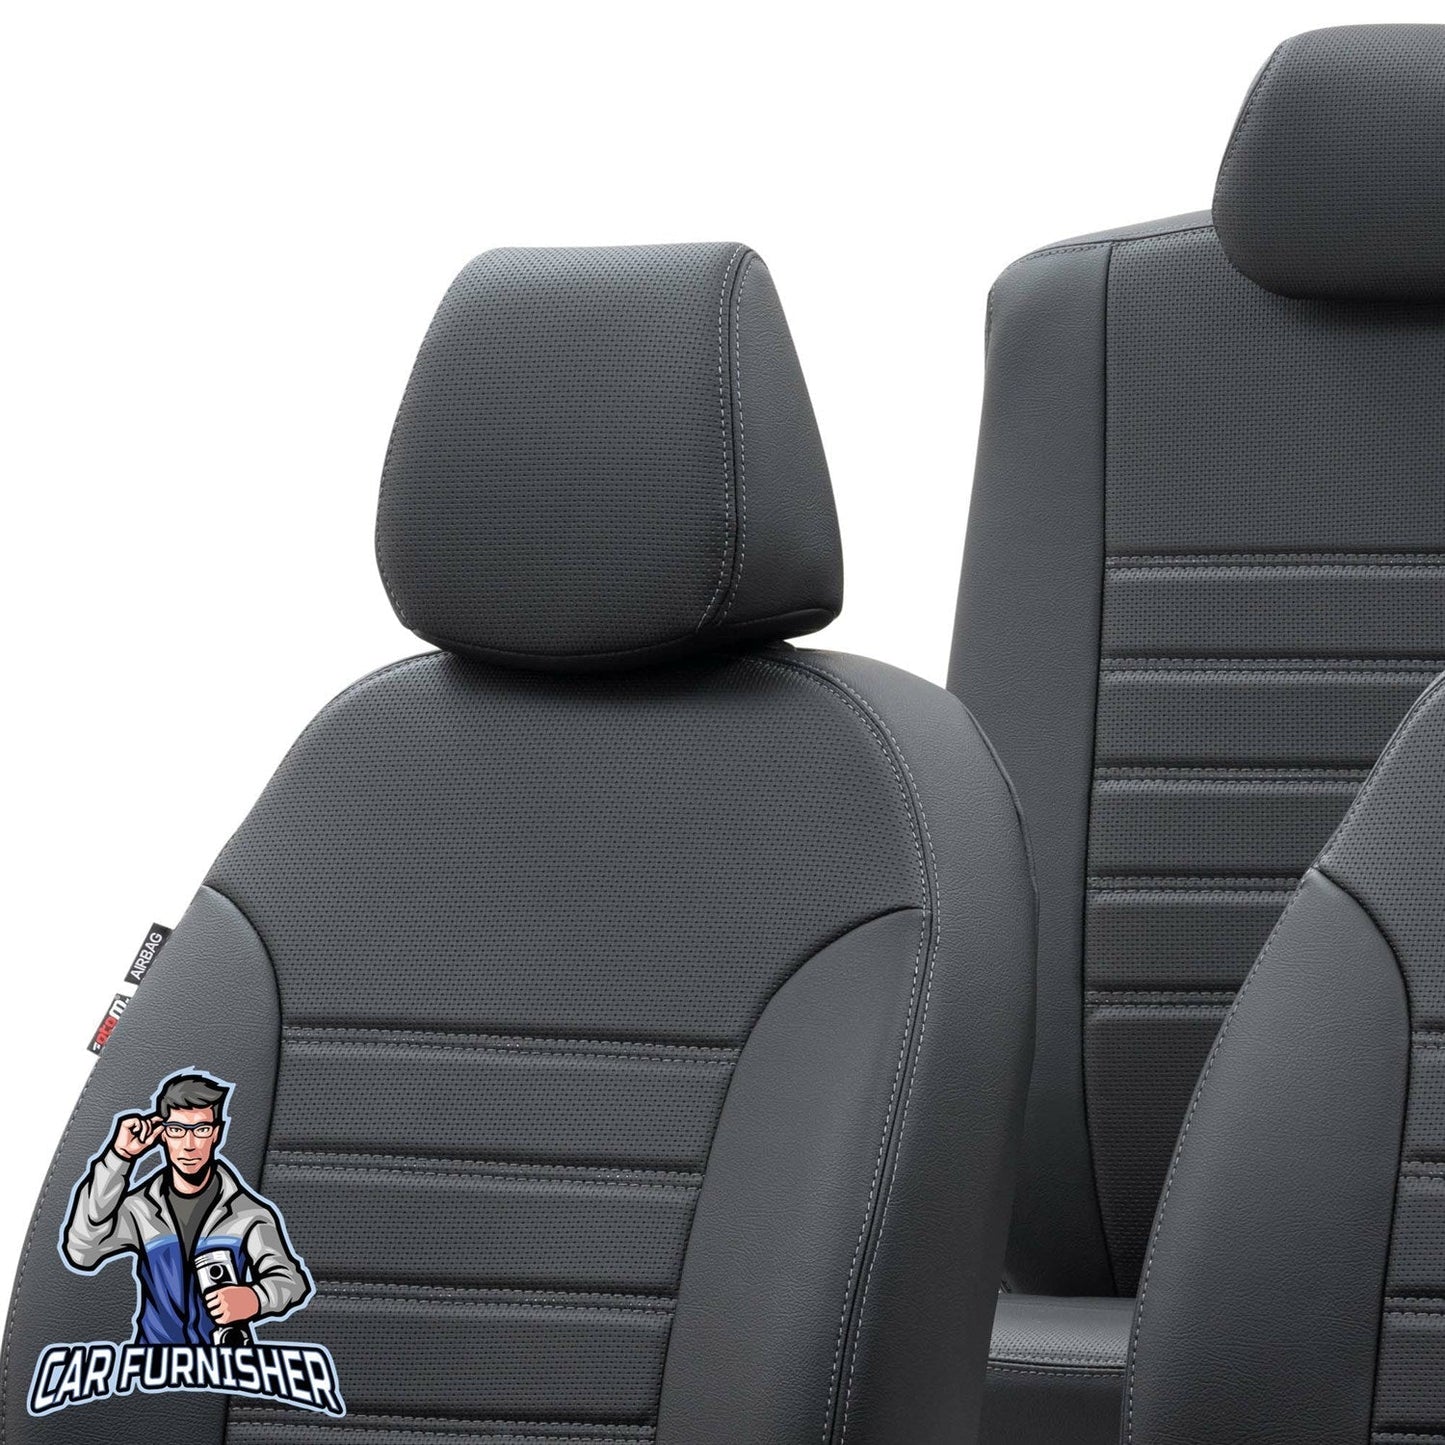 Geely Emgrand Seat Covers New York Leather Design Black Leather